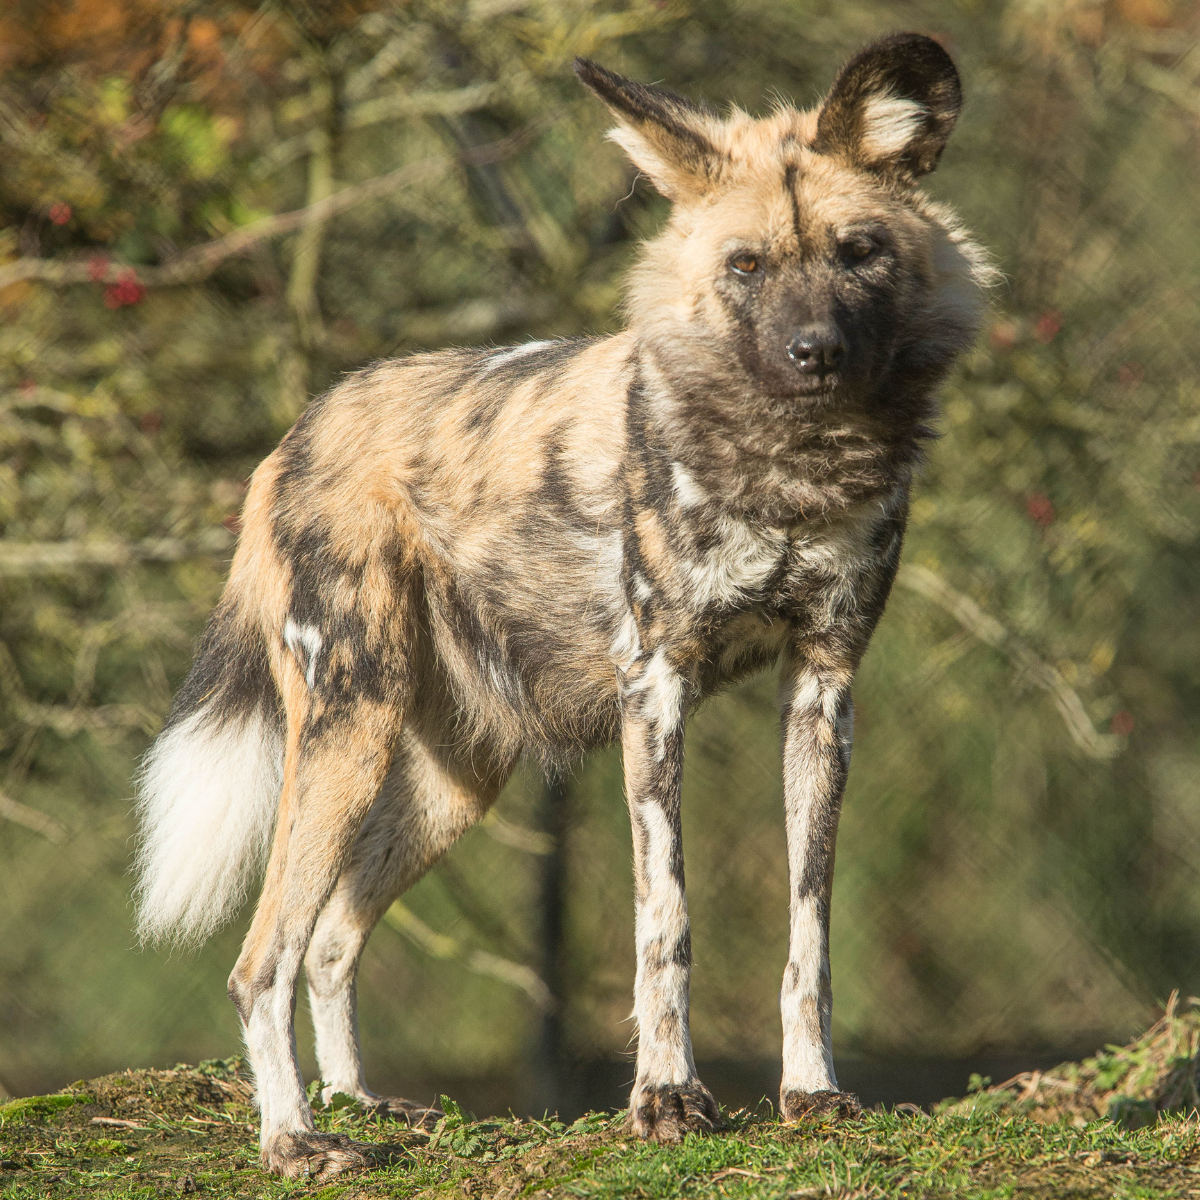 Adopt an African Painted Dog